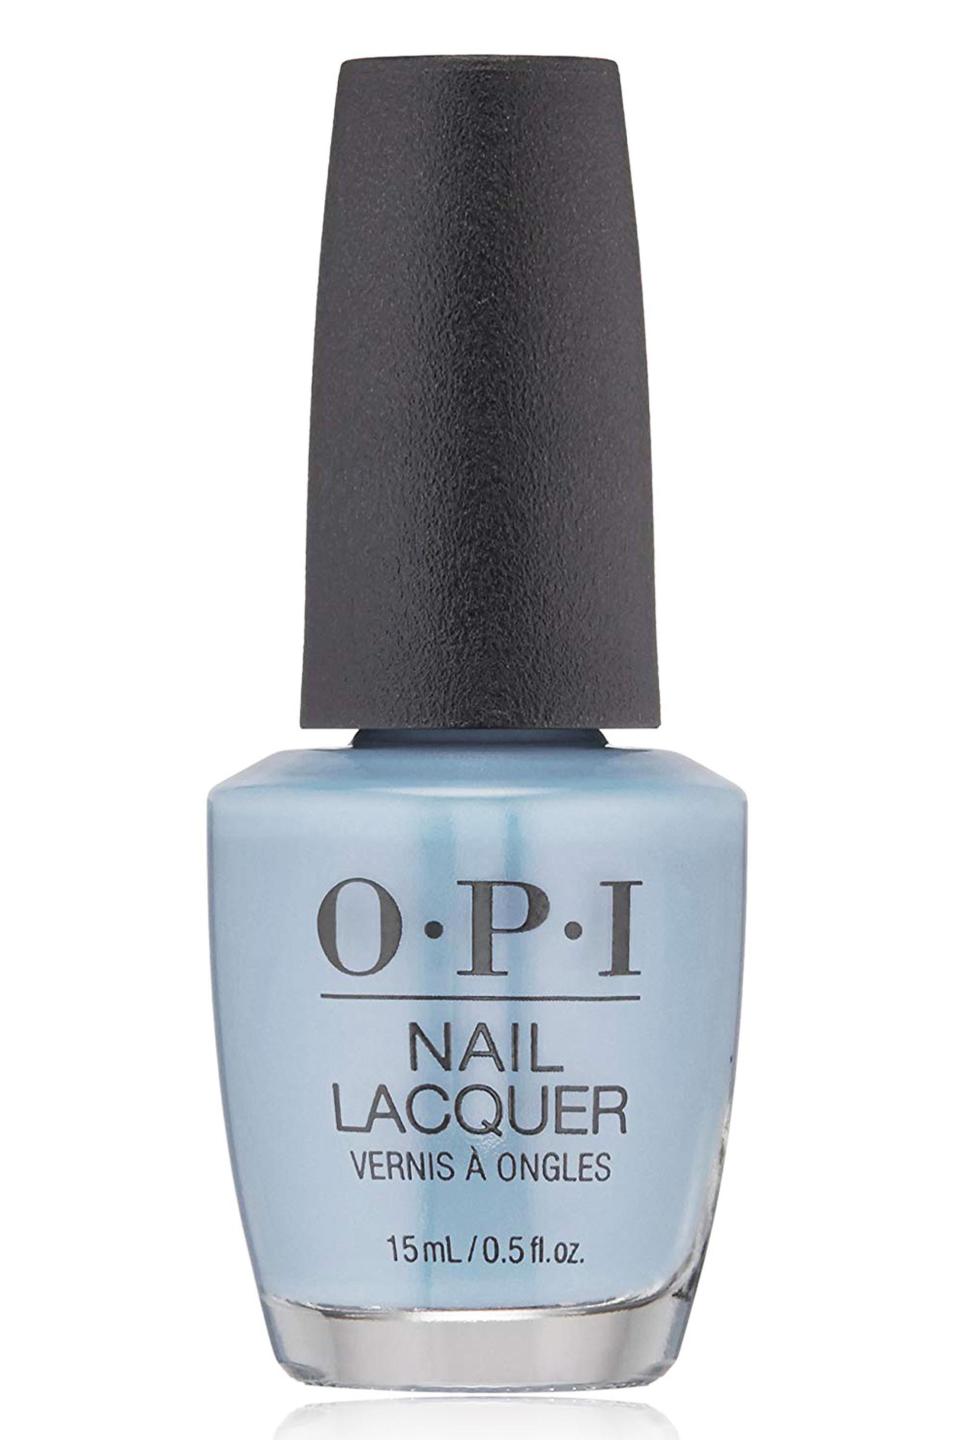 39) OPI Nail Lacquer in Check Out The Old Geysirs